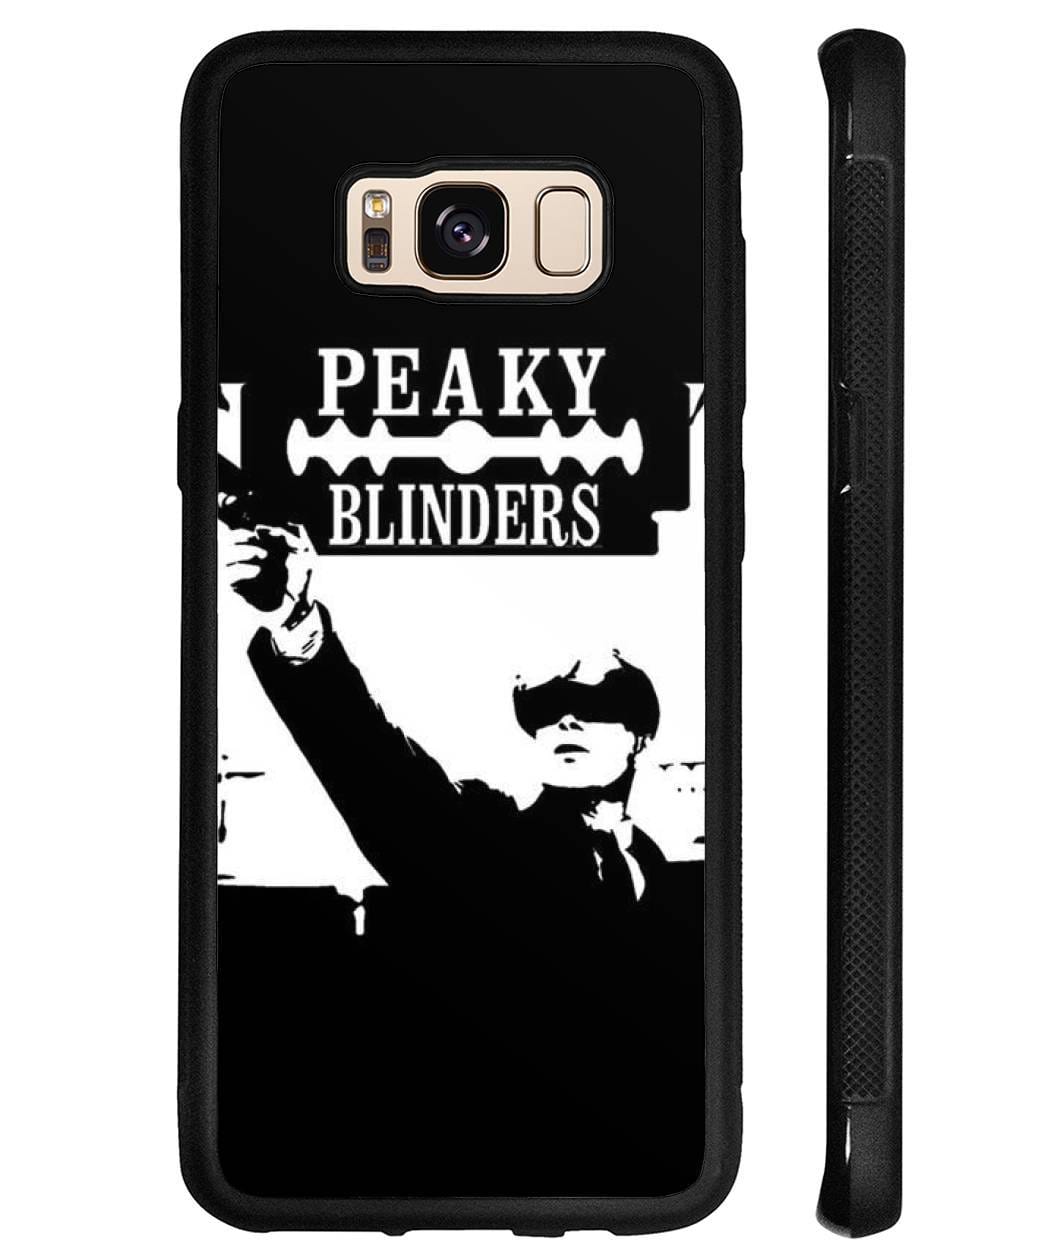 By The Order Of The Peaky Blinders